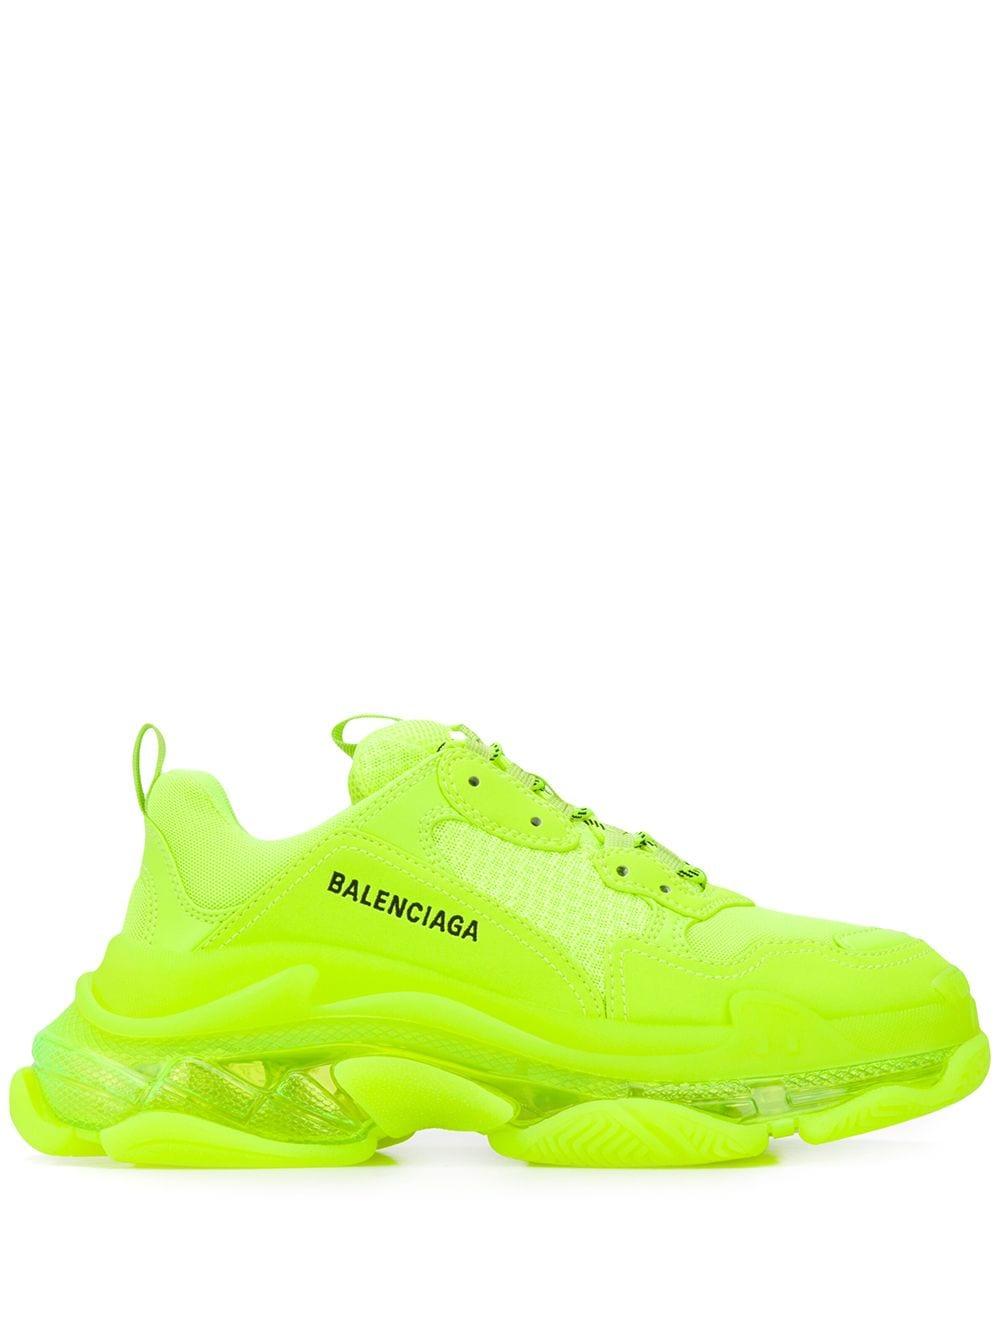 Balenciaga Synthetic Triple S Clear Sole Sneakers in Yellow - Save 8% ...